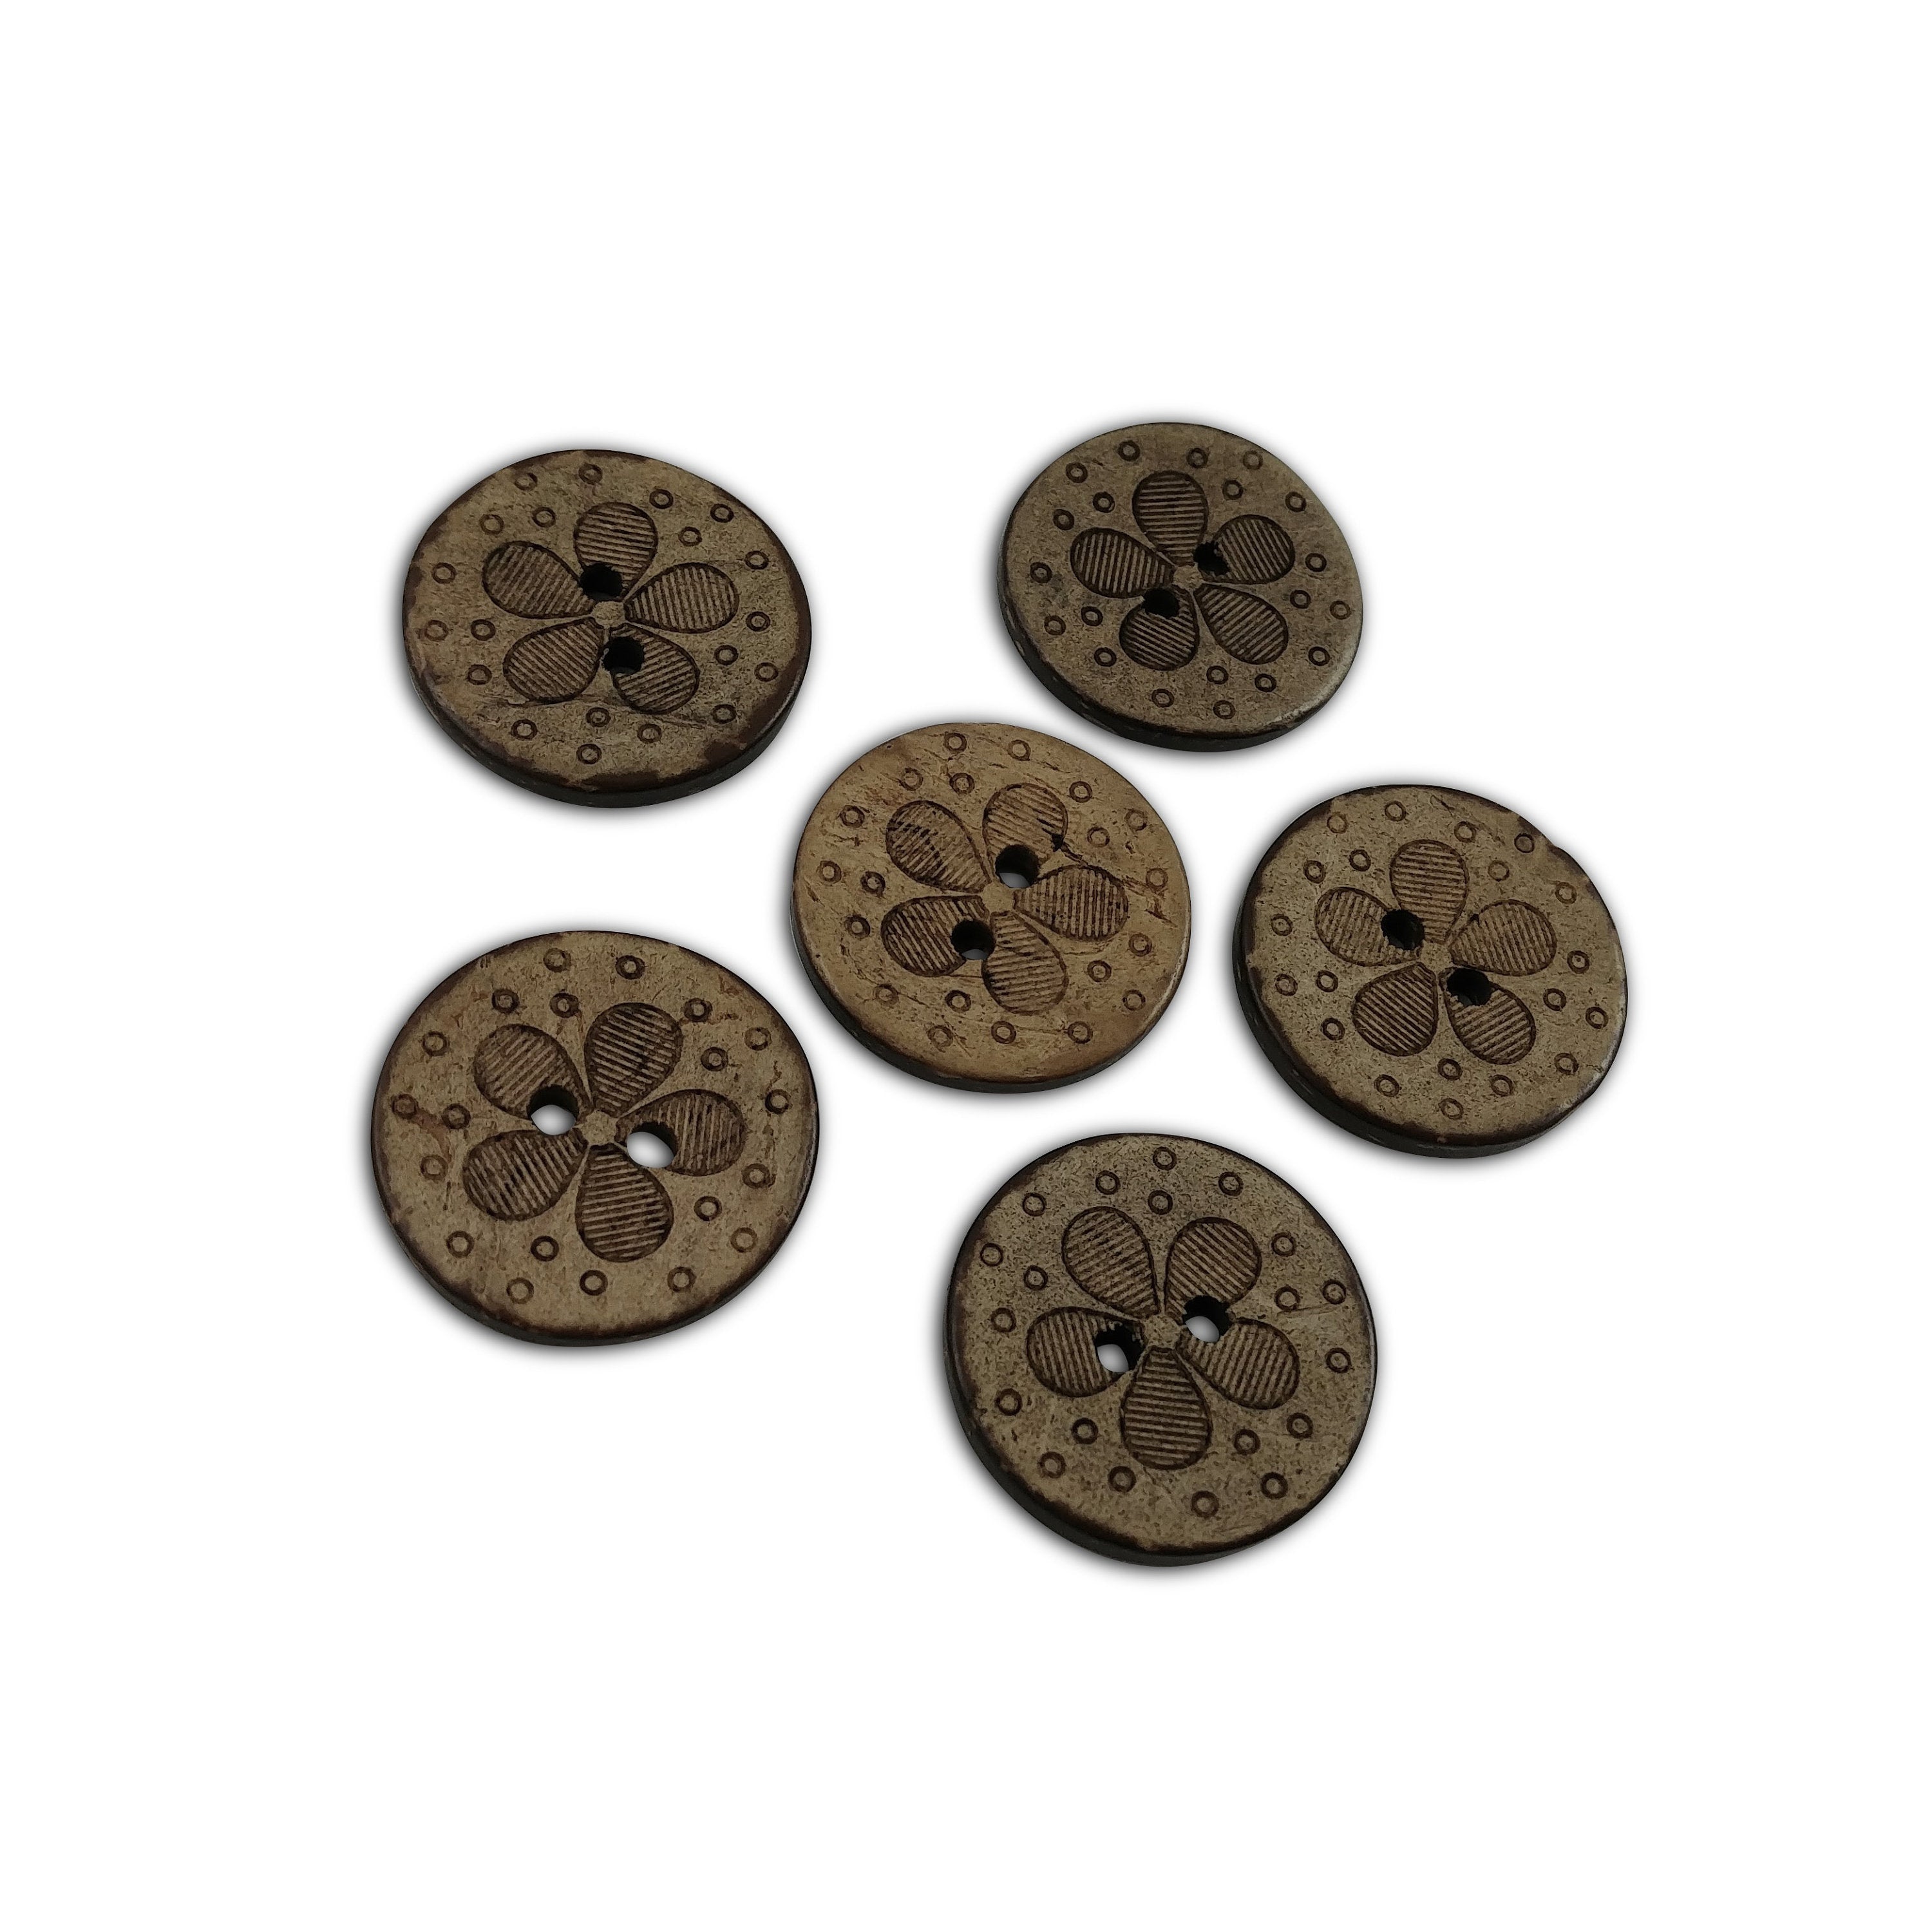 6 Two holes flower pattern coconut shell buttons 20mm 